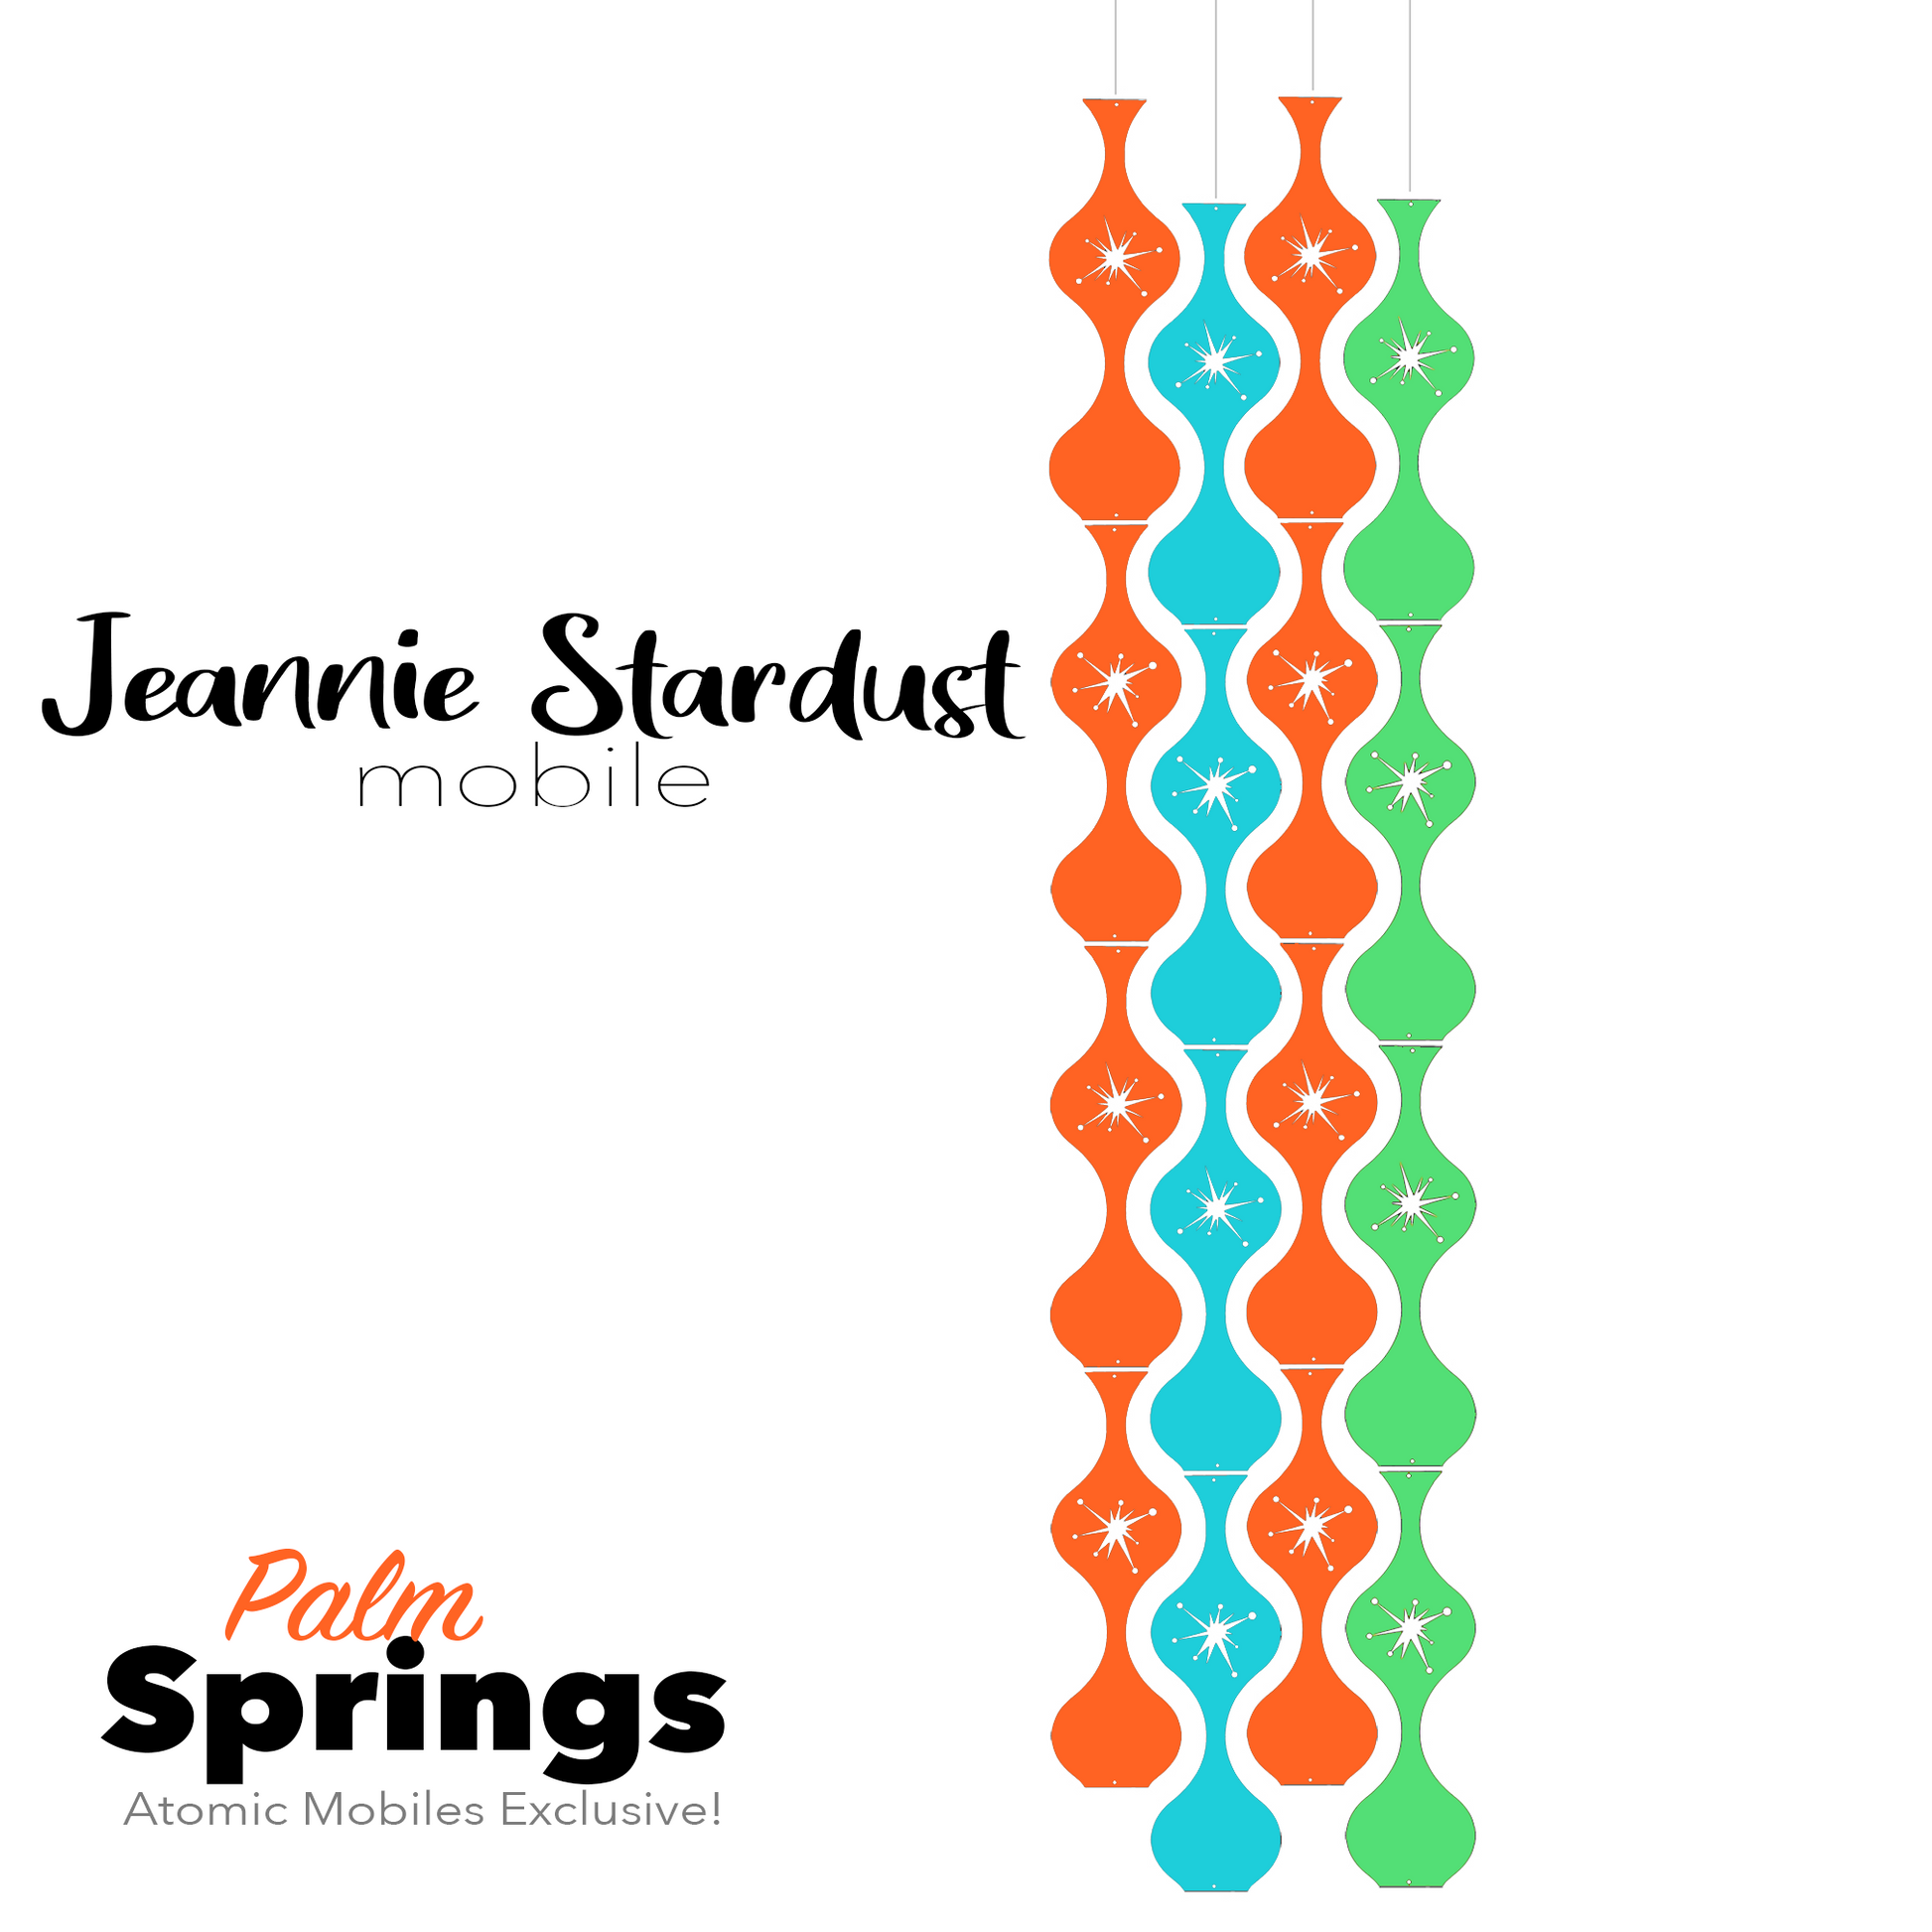 Palm Springs Jeannie Stardust Hanging Art Mobile - mid century modern home decor in Palm Springs colors of Orange, Aqua, and Lime - by AtomicMobiles.com